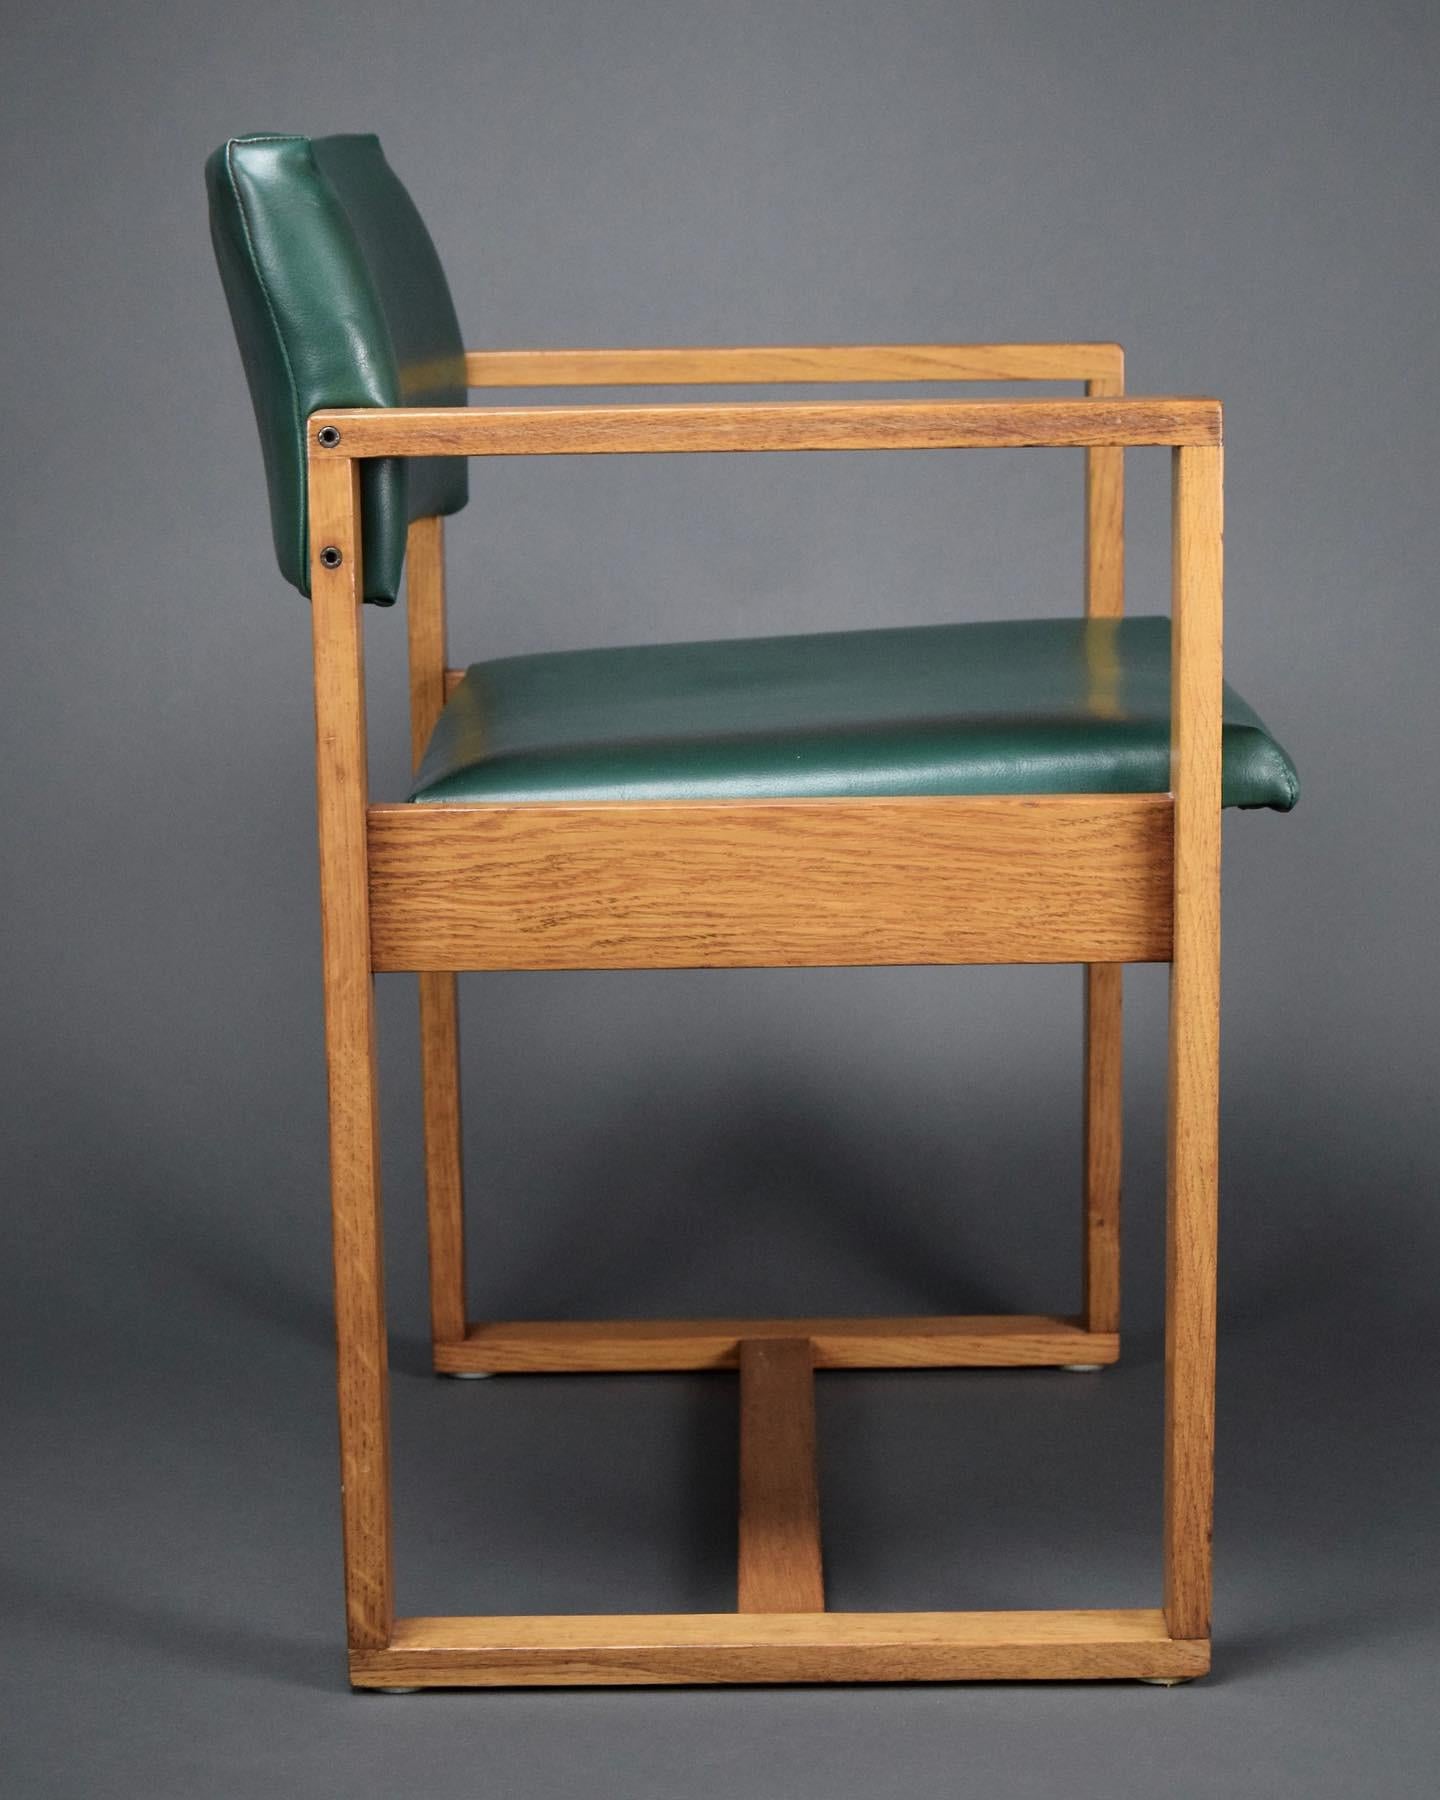 Bottle green Mid-Century Modern faux leather arm chair by Ate van Apeldoorn for Woodwork Hattem the Netherlands. 
This elegant and classy piece can be used both as an armchair or desk chair.
The founder of Houtwerk Hattem, Ate van Apeldoorn,